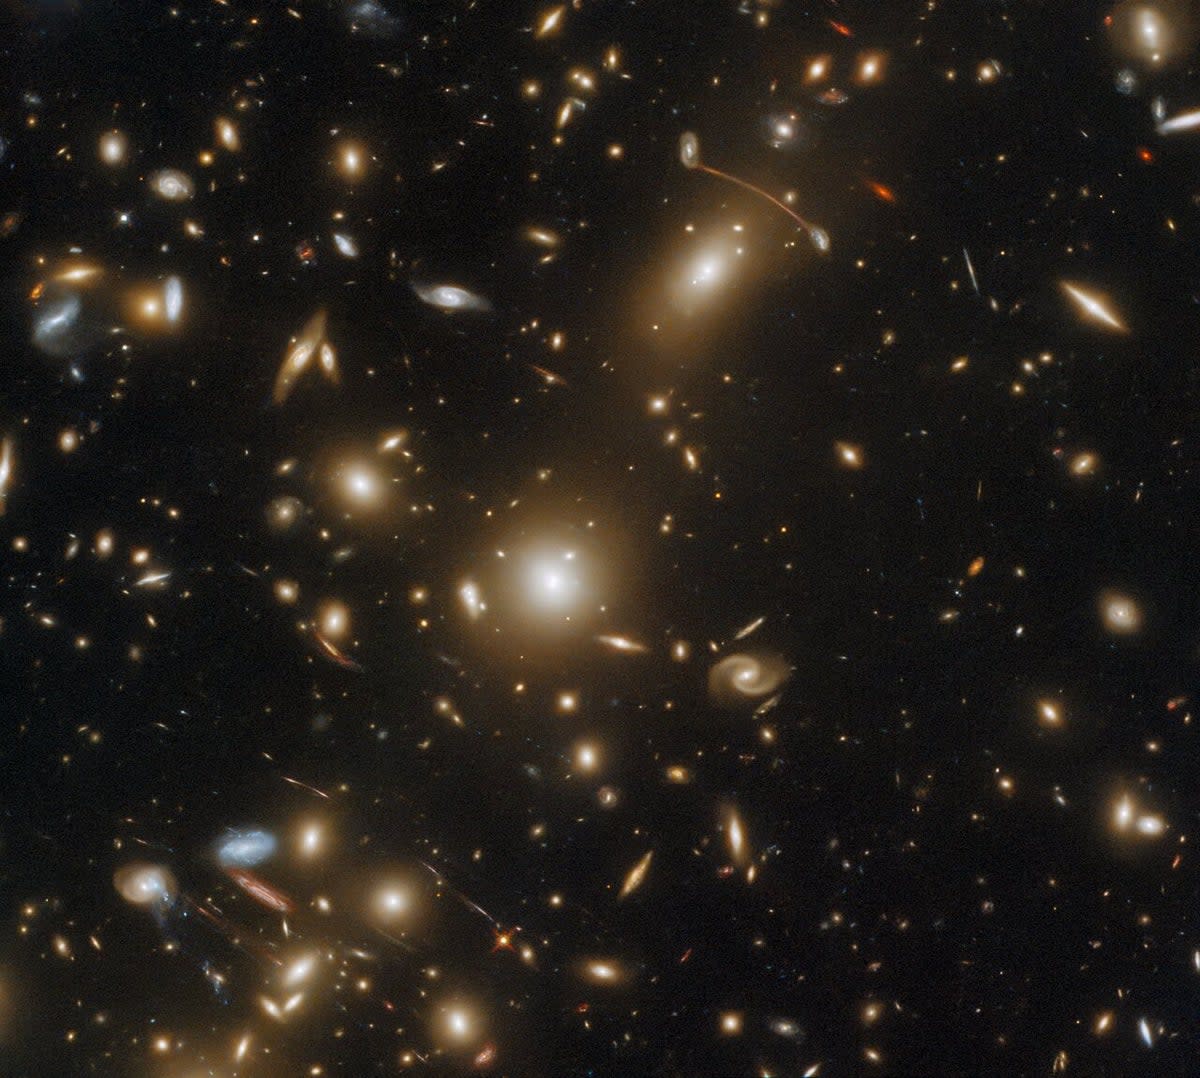 An image of the distant galaxy cluster Abell 1351 taken by the Hubble Space Telescope (ESA/Hubble & NASA, H. EbelingAck)